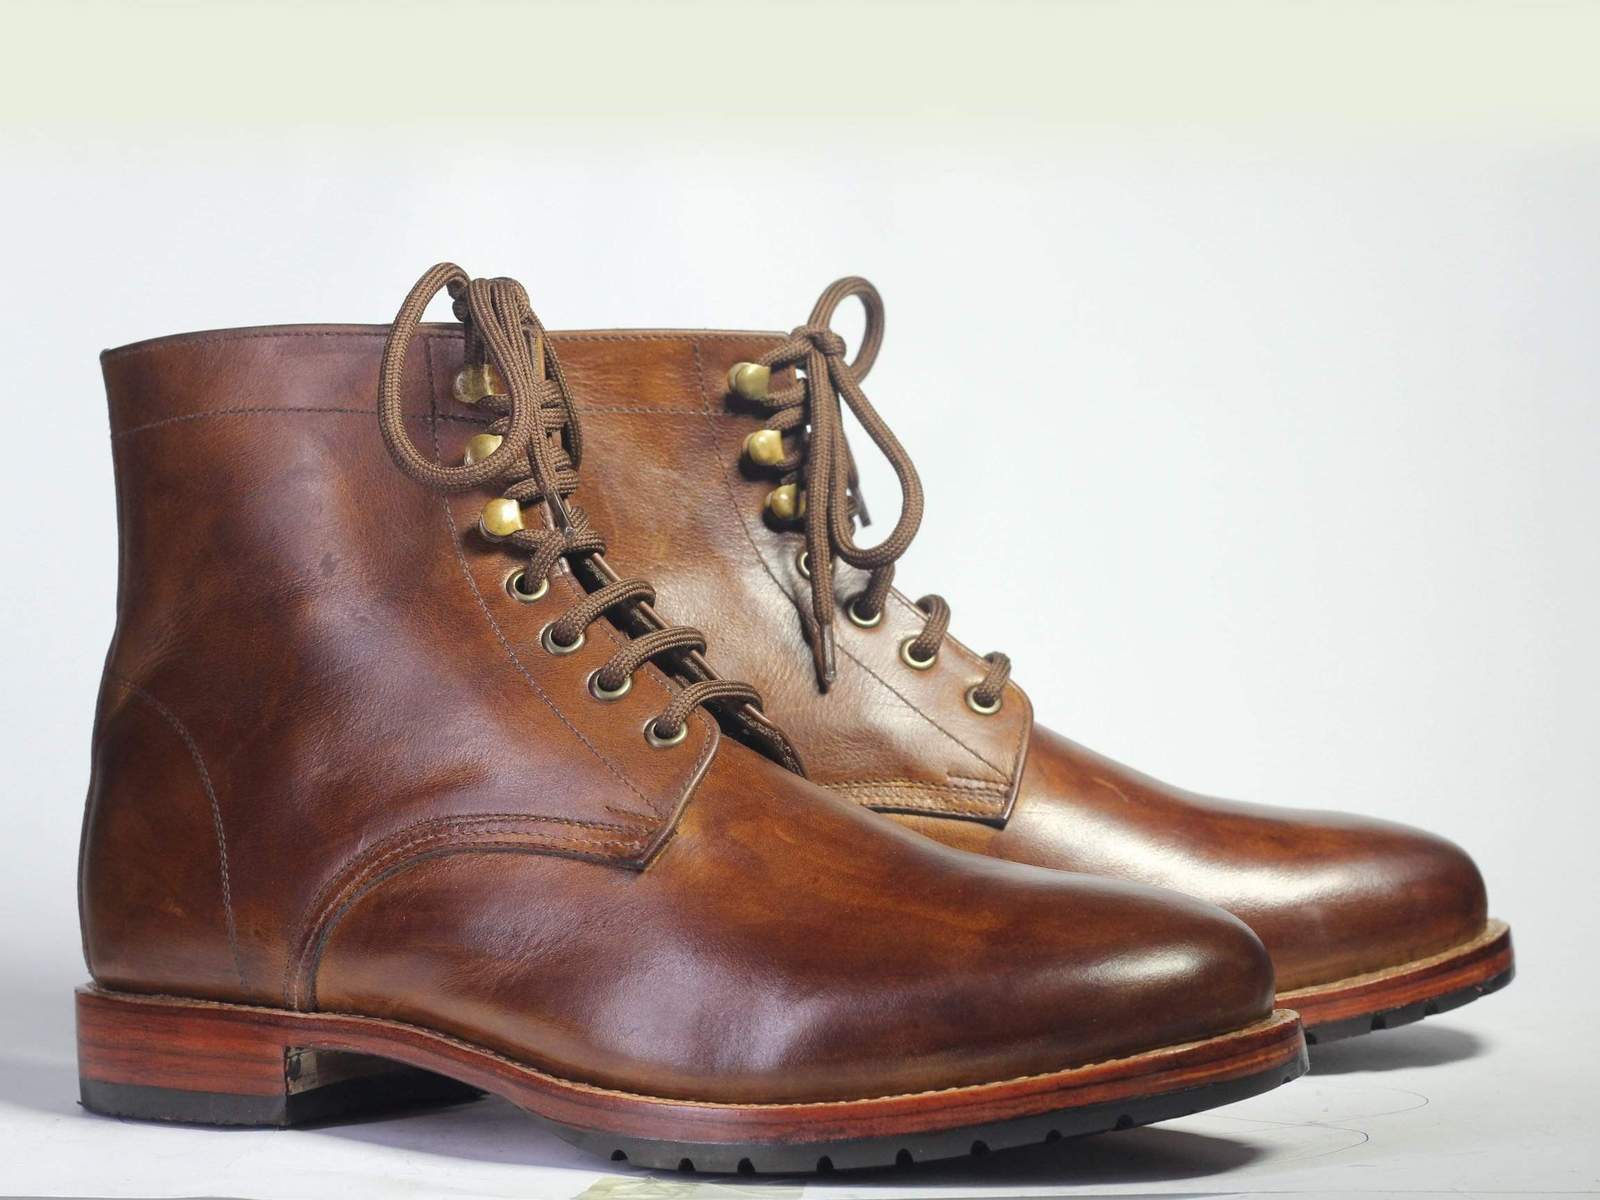 Bespoke Brown Lace Up Ankle High Boots For Men's - Boots